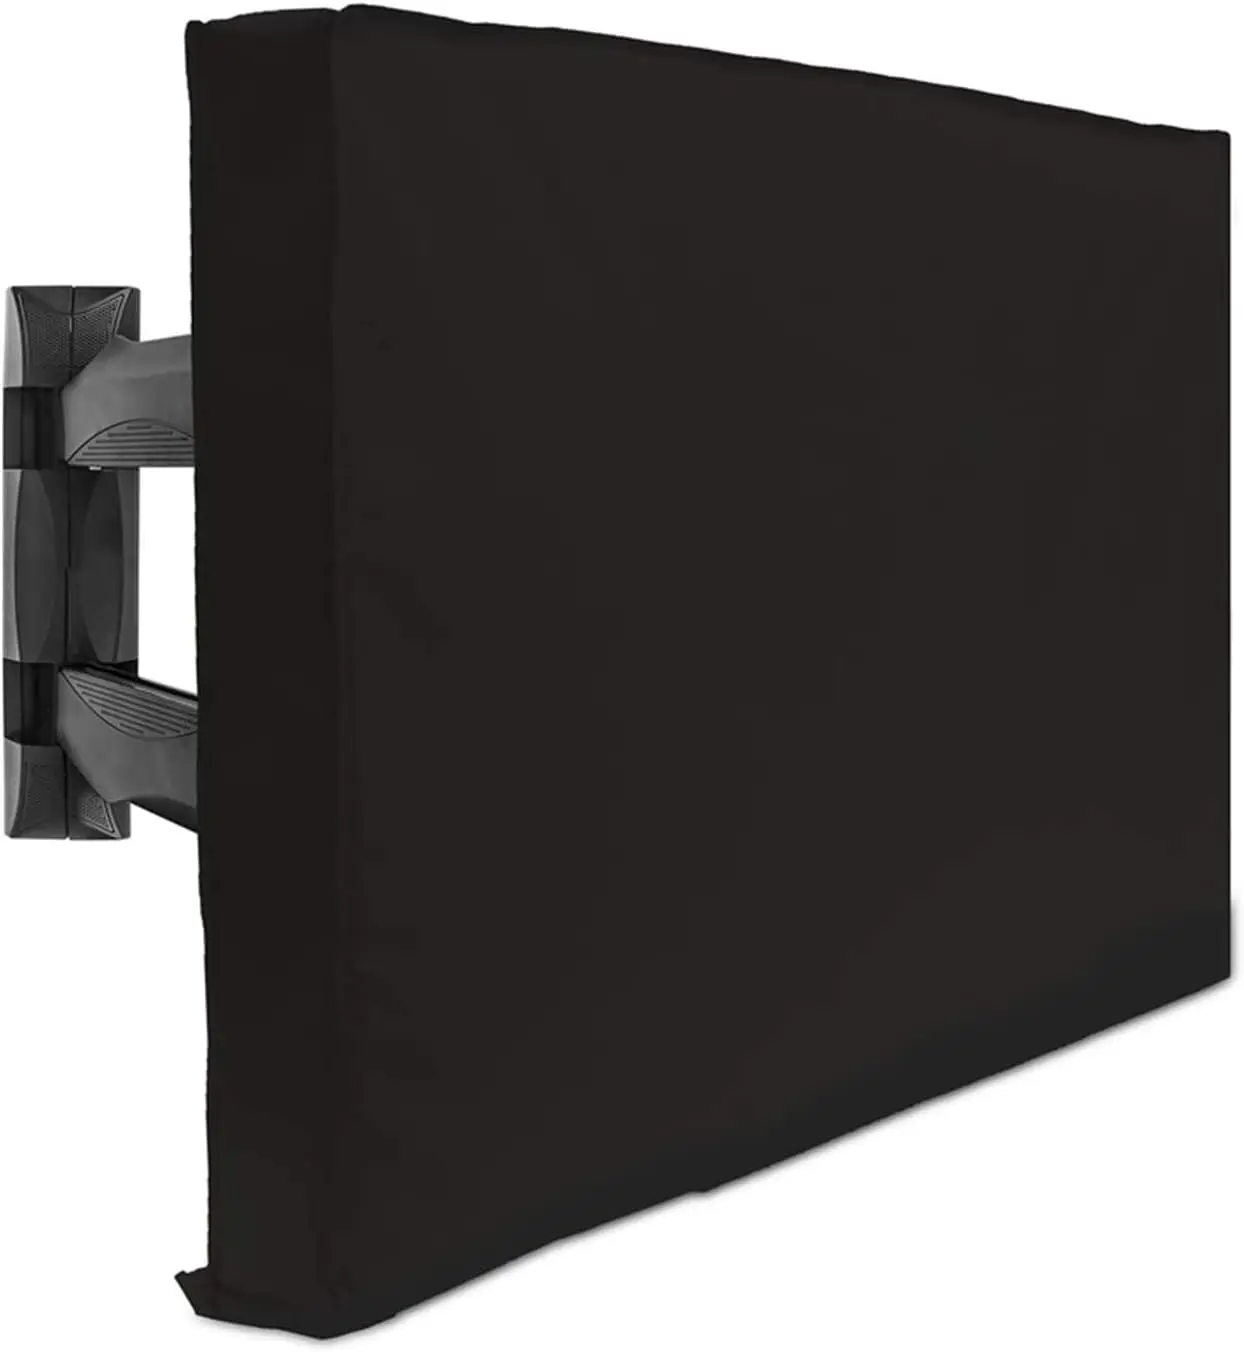 

Outdoor TV Cover 55" - 58" - with Bottom Cover - 600D Water-Resistant and Dust-Resistant Material- Fits Your TV Better